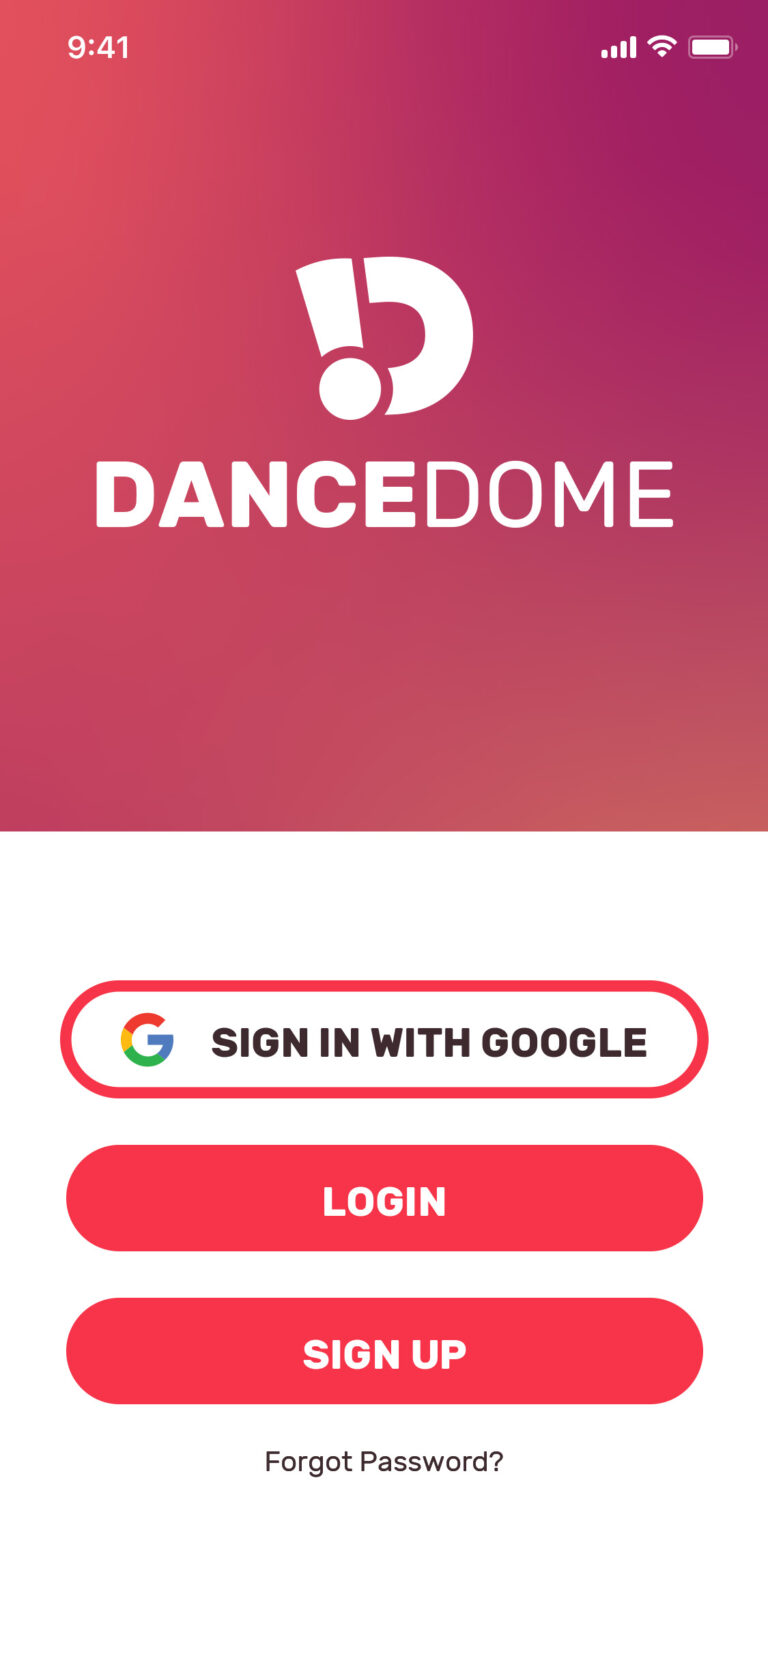 Login screen for Dance Dome app with Google Sign In button, Login button, and Sign Up button.